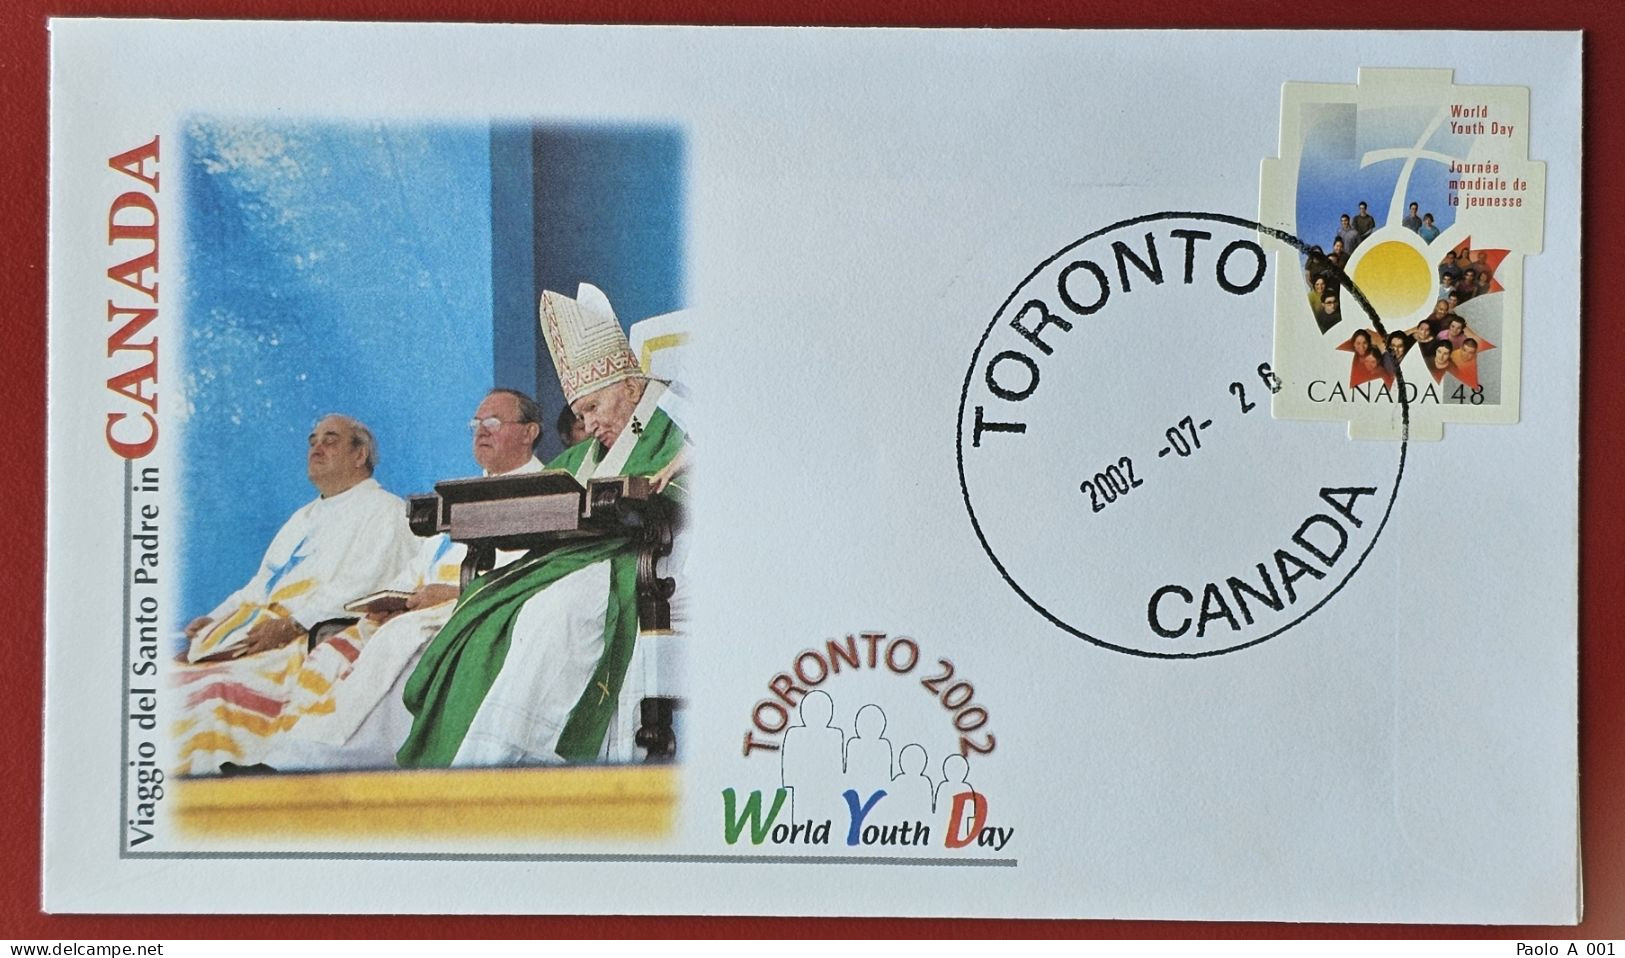 CANADA 2002 TORONTO VISIT POPE JOHN PAUL II WORLD YOUTH DAY VISITE DU PAPE JEAN PAUL II - Covers & Documents